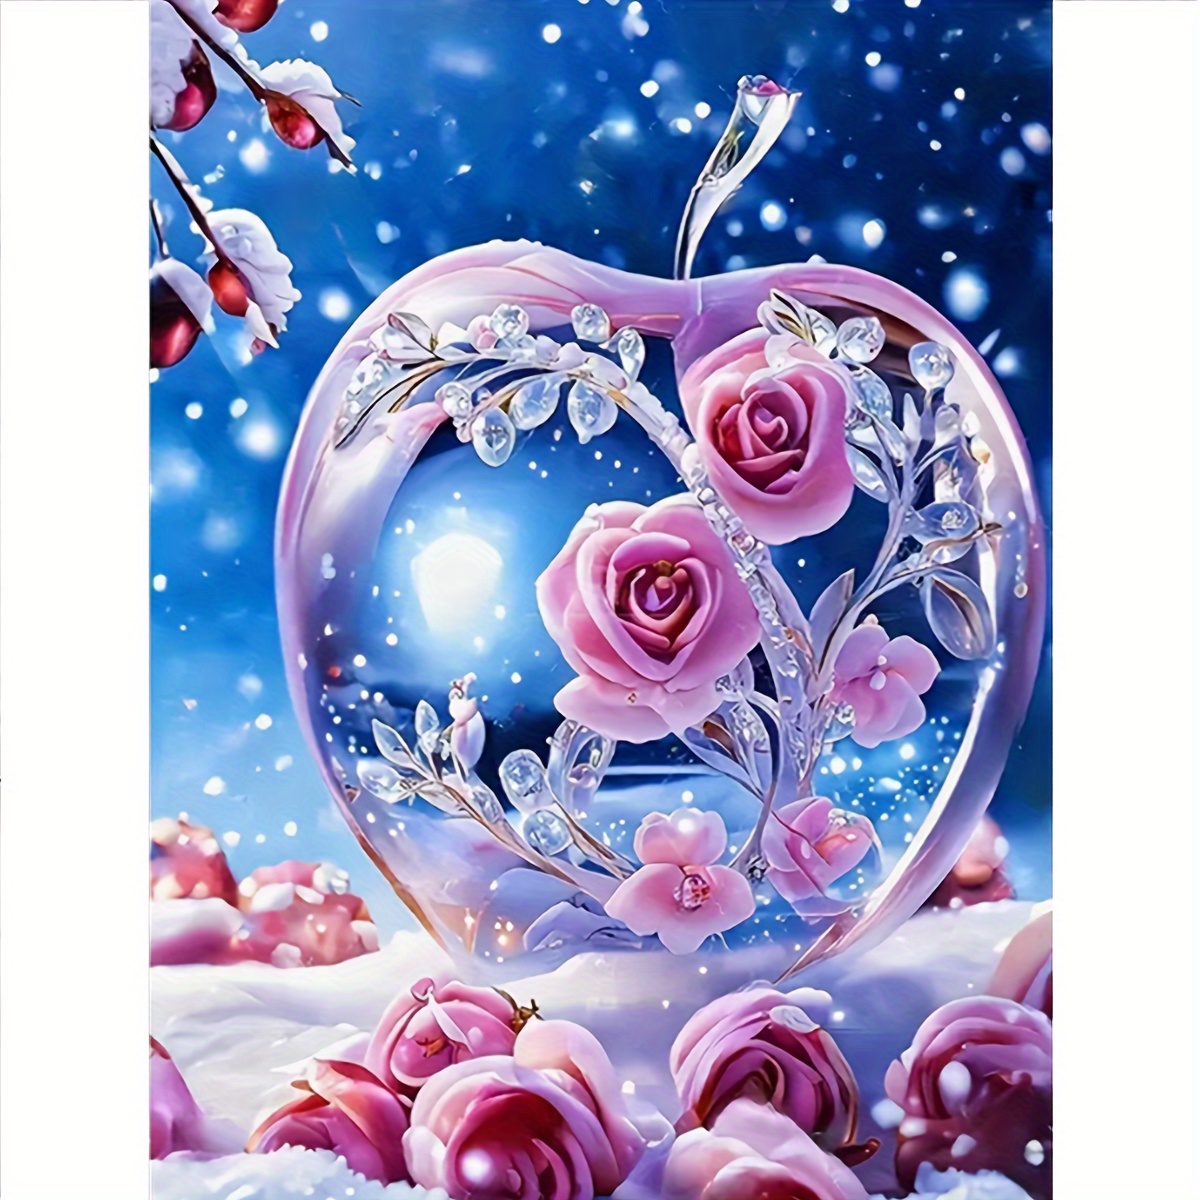 

5d Diy Diamond Painting Kit - Rose Full Drill Round Acrylic Diamond Embroidery Set, Home Decor Craft (1 Pack, 7.9x11.8 Inches)